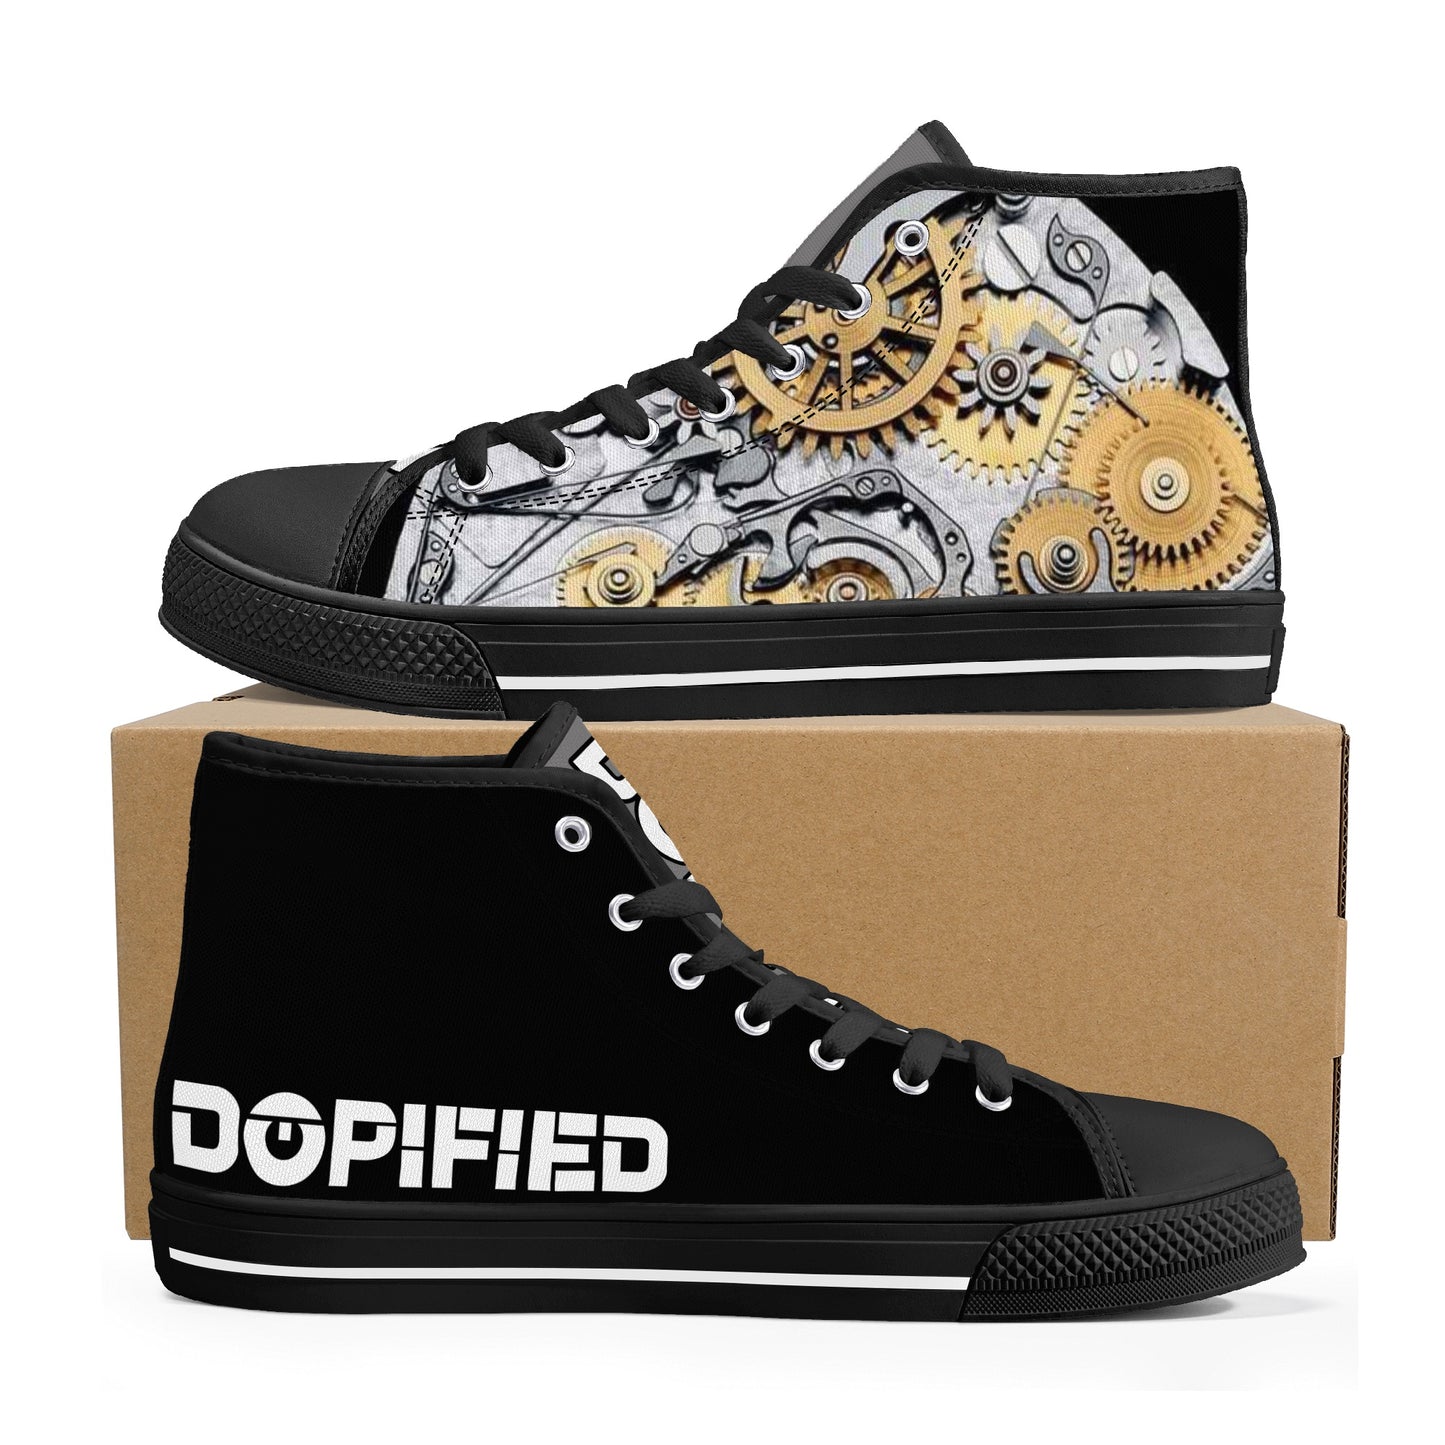 Mens DOPiFiED GADGETS High Top Canvas Sneakers